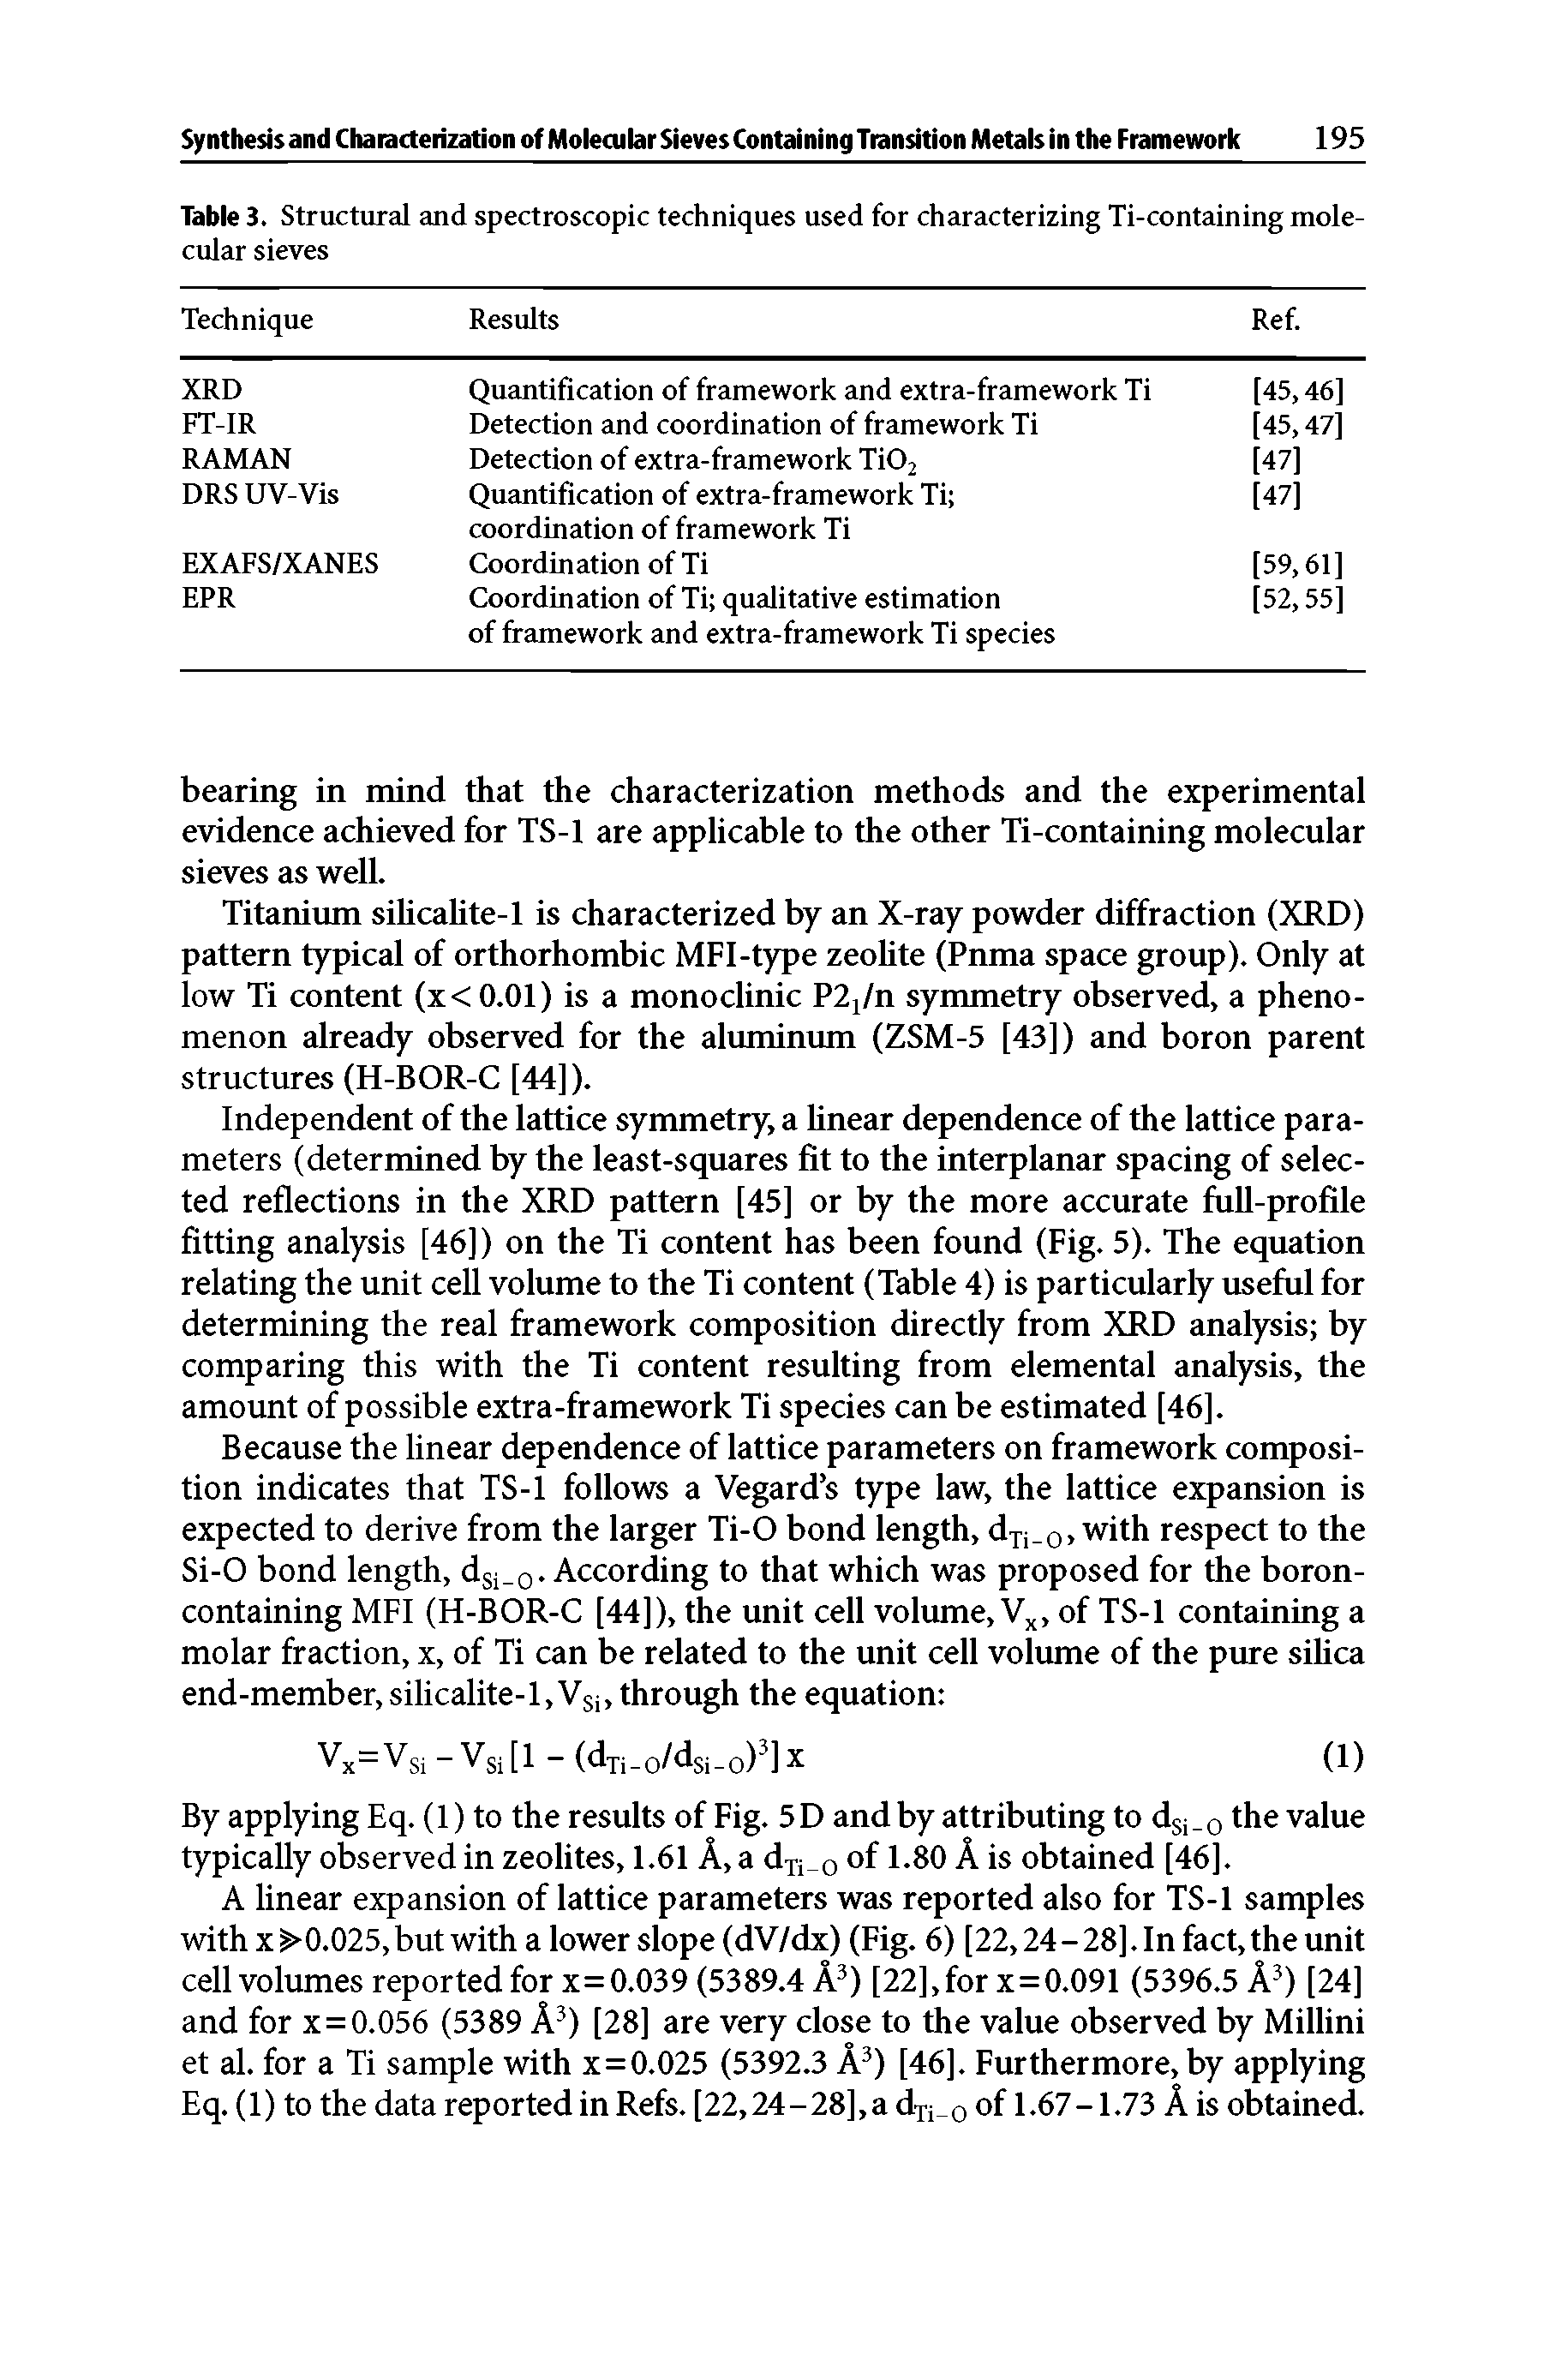 Table 3. Structural and spectroscopic techniques used for characterizing Ti-containing molecular sieves ...